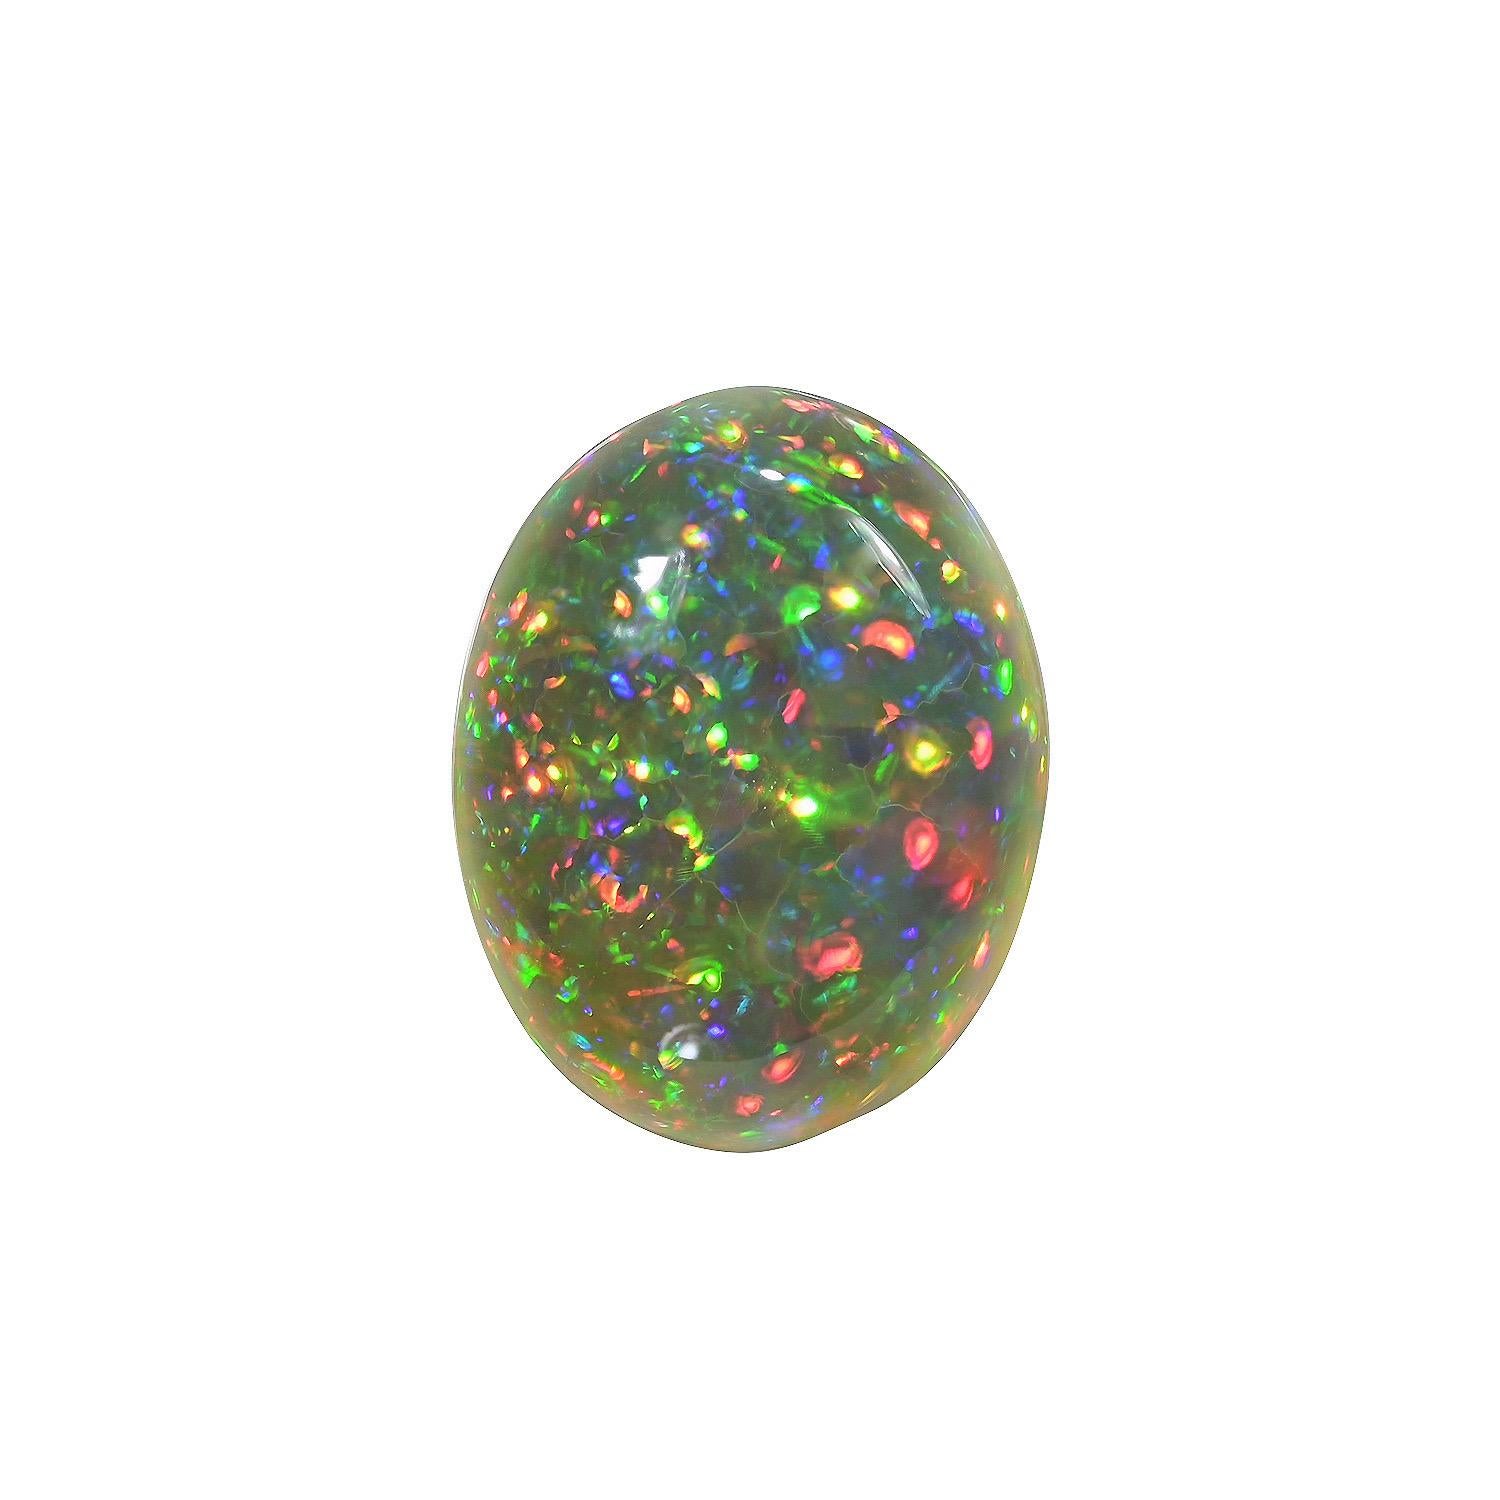 Natural 10.20 carat rectangular oval Ethiopian Black Opal loose gemstone, offered unmounted to an exclusive gem collector.
Returns are accepted and paid by us within 7 days of delivery.
We offer supreme custom jewelry work upon request. Please